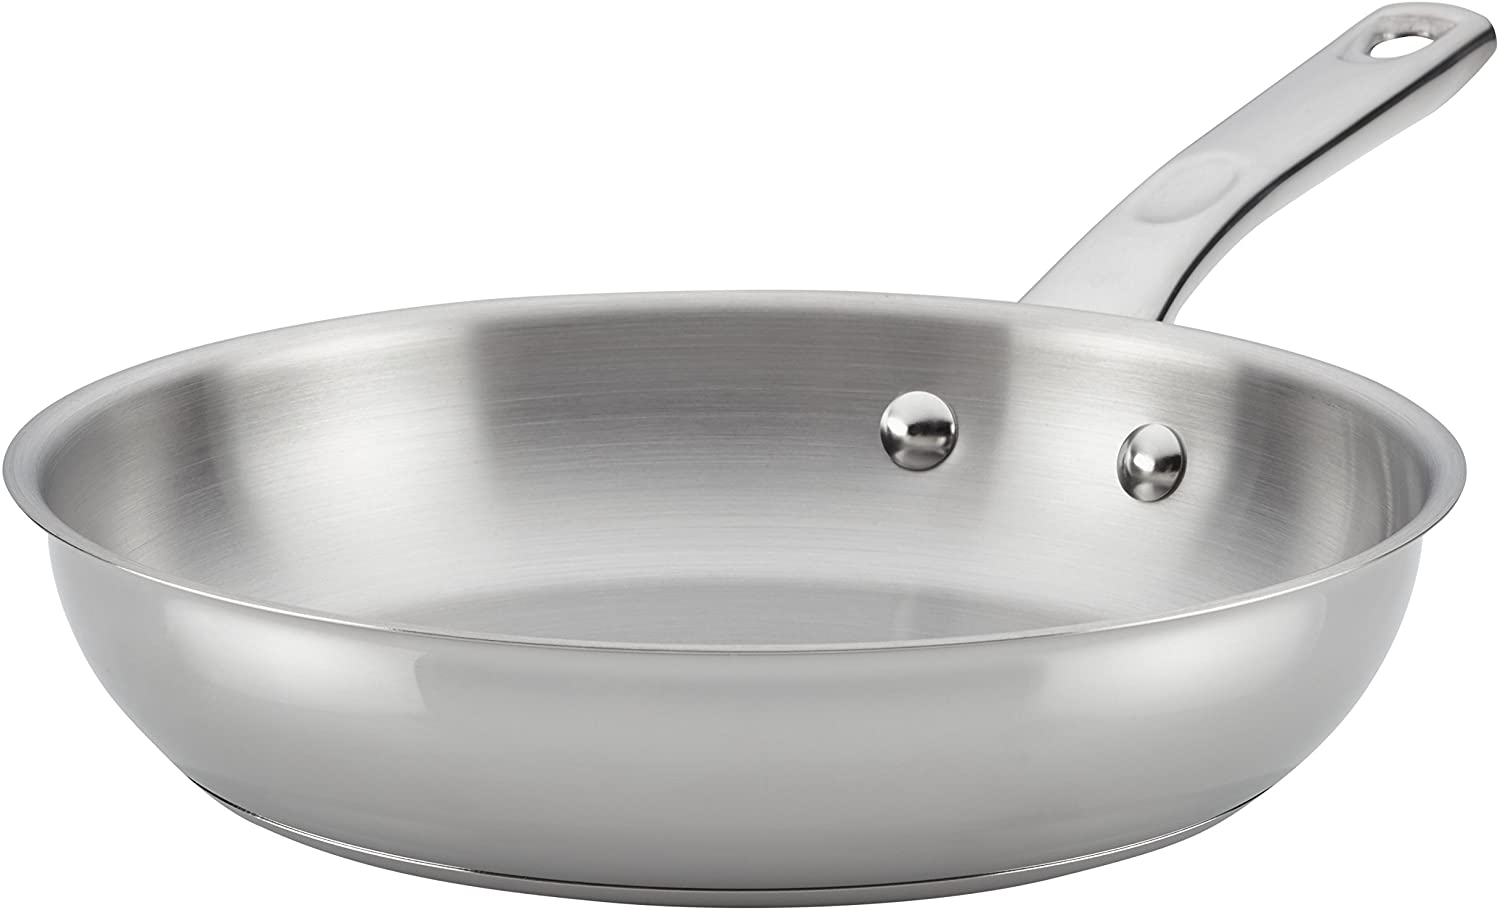 Ayesha Curry 70205 Home Collection Embossed Stovetop Skillet, 12.5-Inch